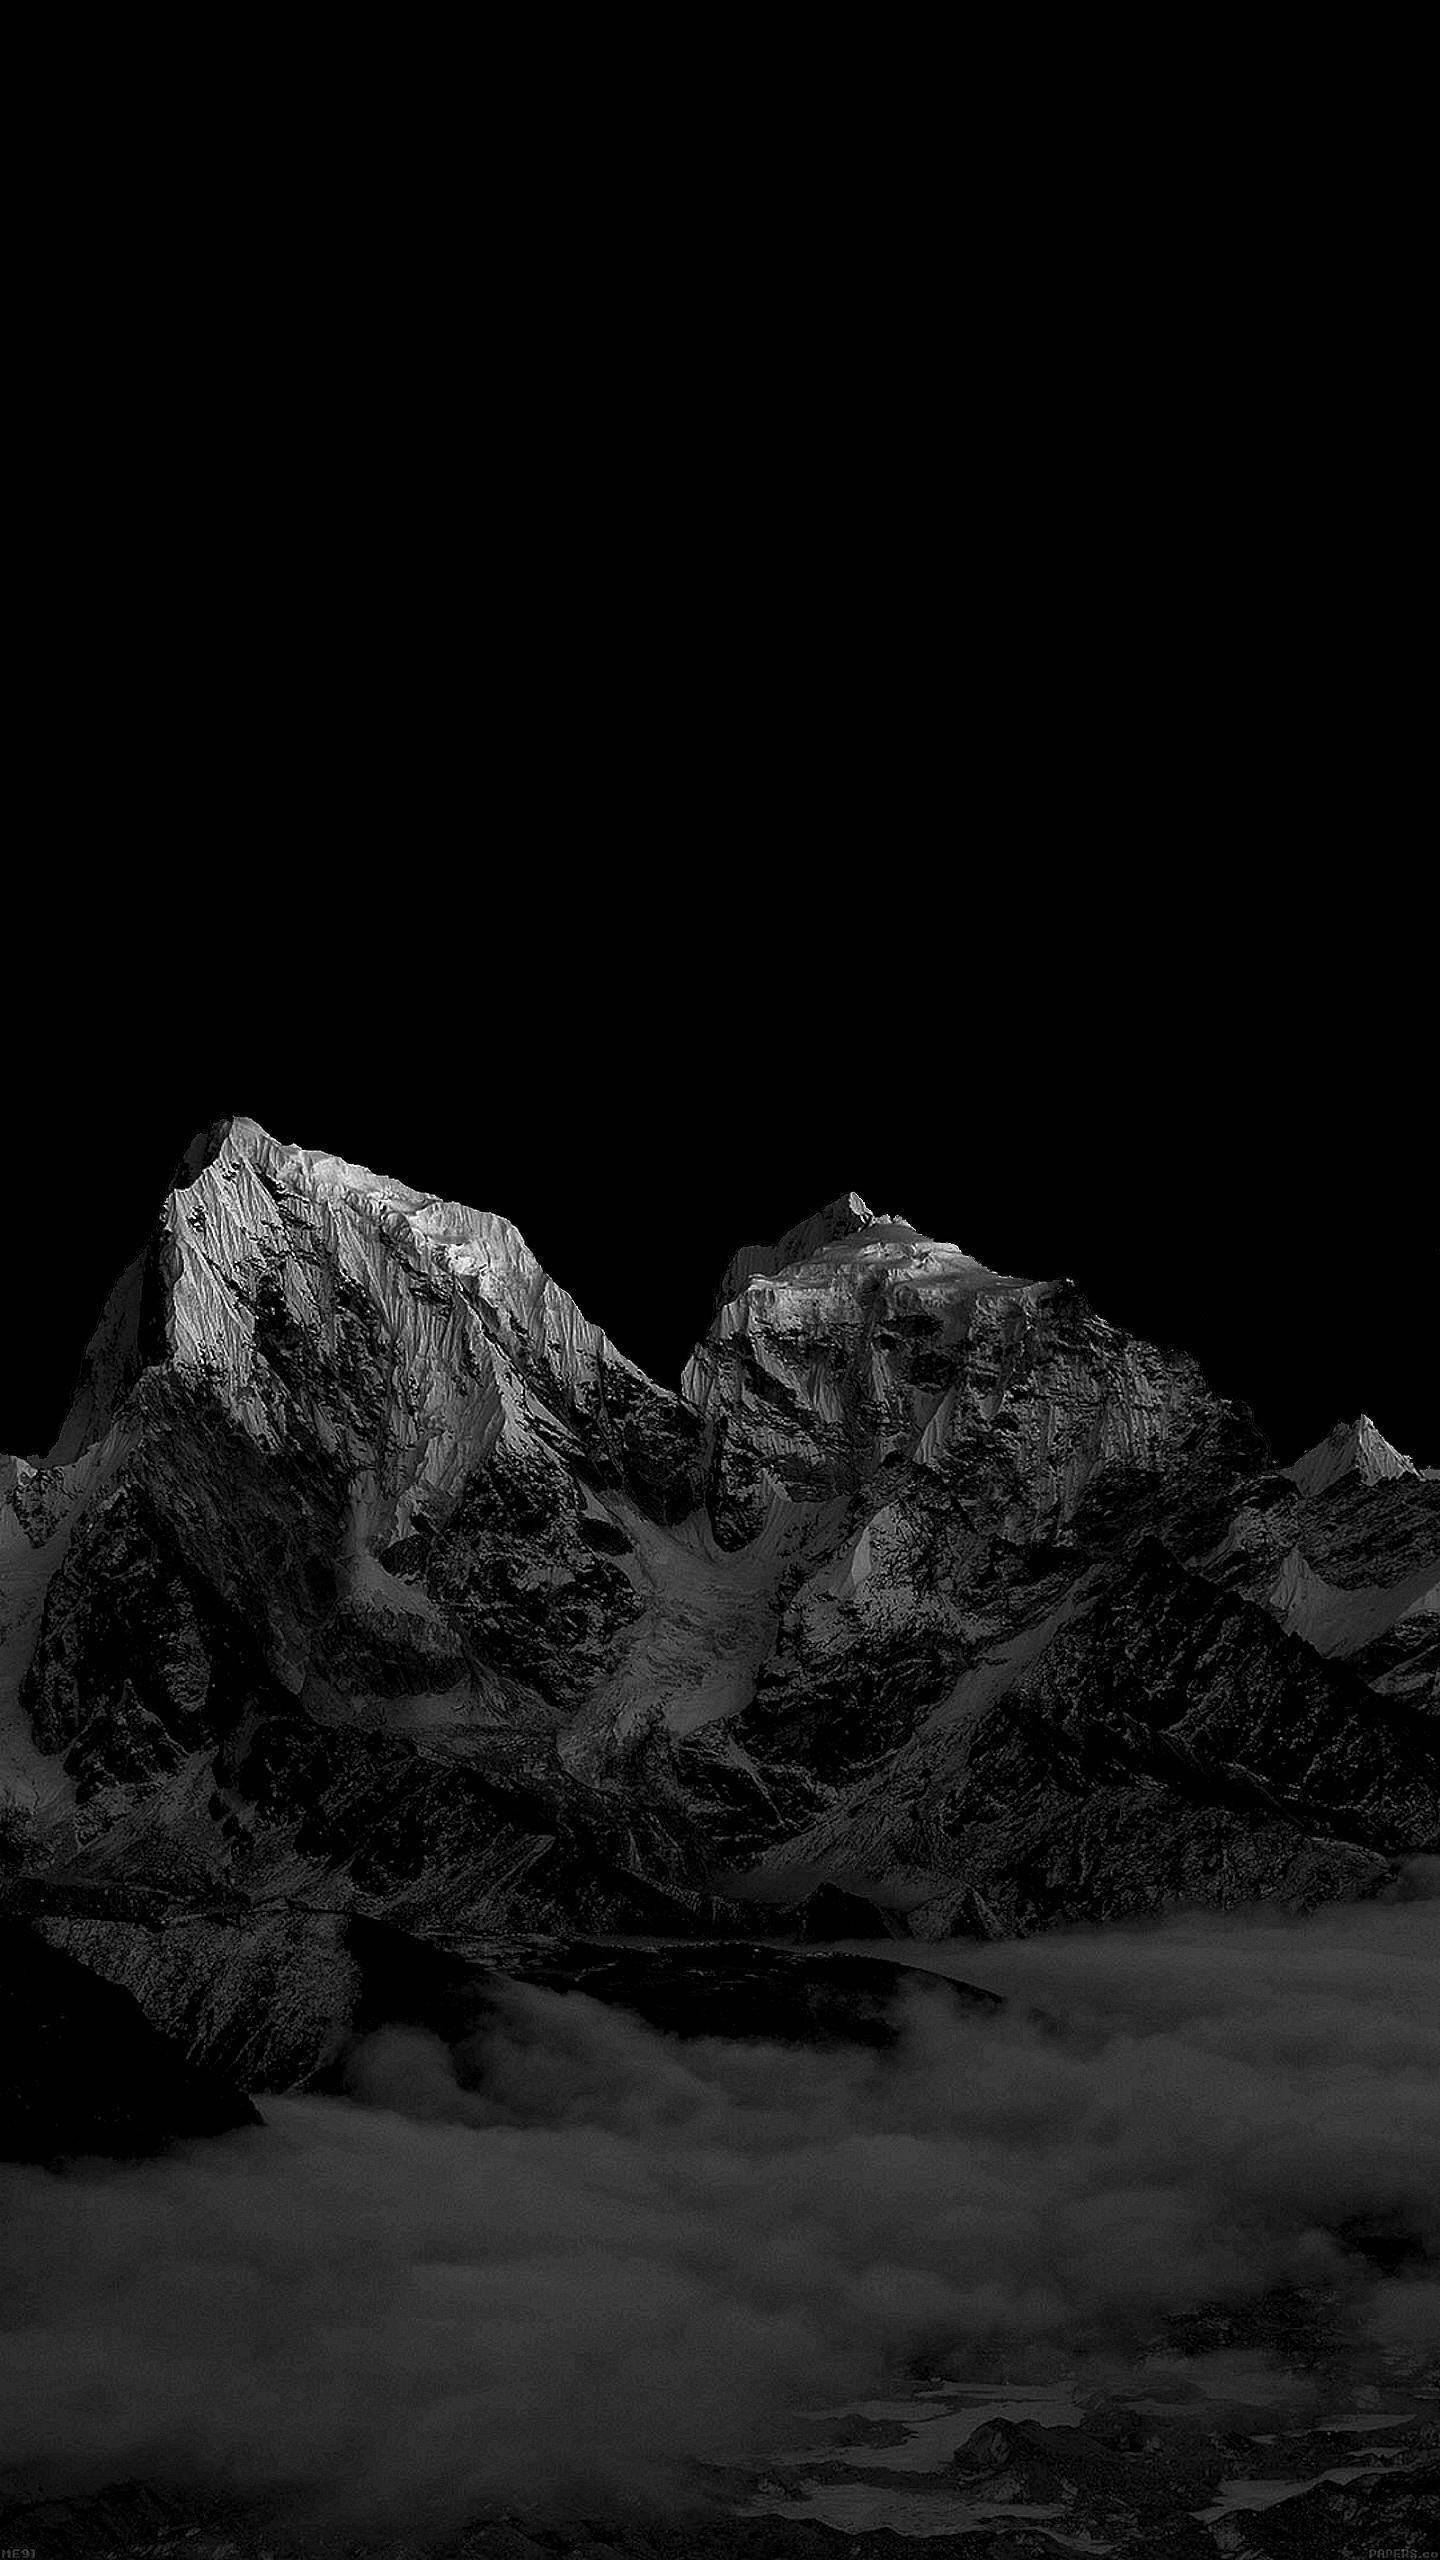 Download Monochrome Snowy Mountains Iphone X Amoled Wallpaper | Wallpapers .com